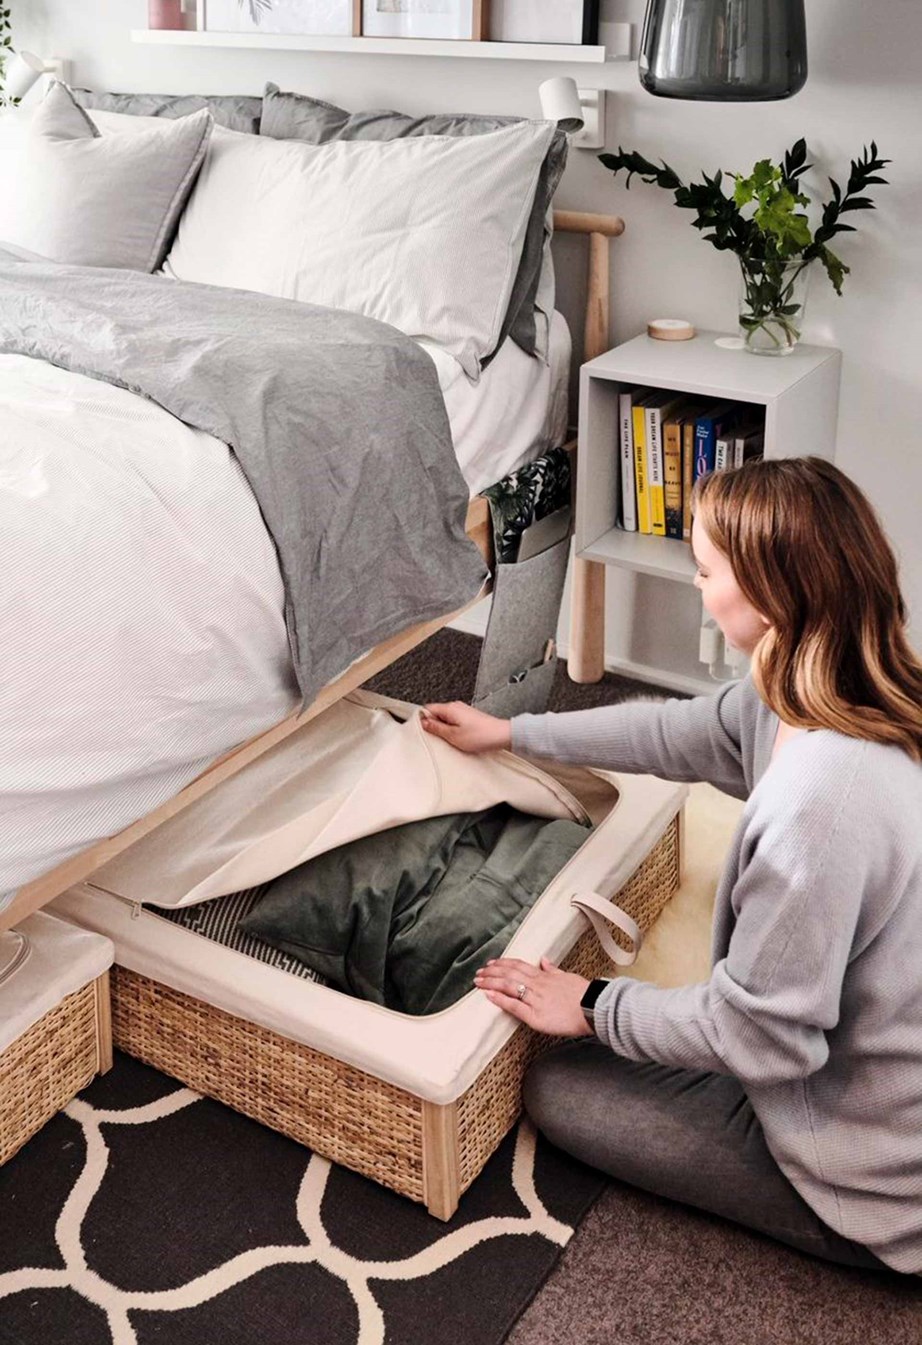 Under-bed storage is a great solution if you're tight on space or if you're looking to keep some of your spare linen or personal belongings neatly tucked away. While you can buy bed bases with built-in storage drawers, if you'd like to save money, you can simply buy storage boxes that fit underneath the bed you already own. 

[**SHOP: Songesand Bed Storage Box, $80, Ikea**](https://www.ikea.com/au/en/p/songesand-bed-storage-box-set-of-2-white-10372542/|target="_blank"|rel="nofollow")